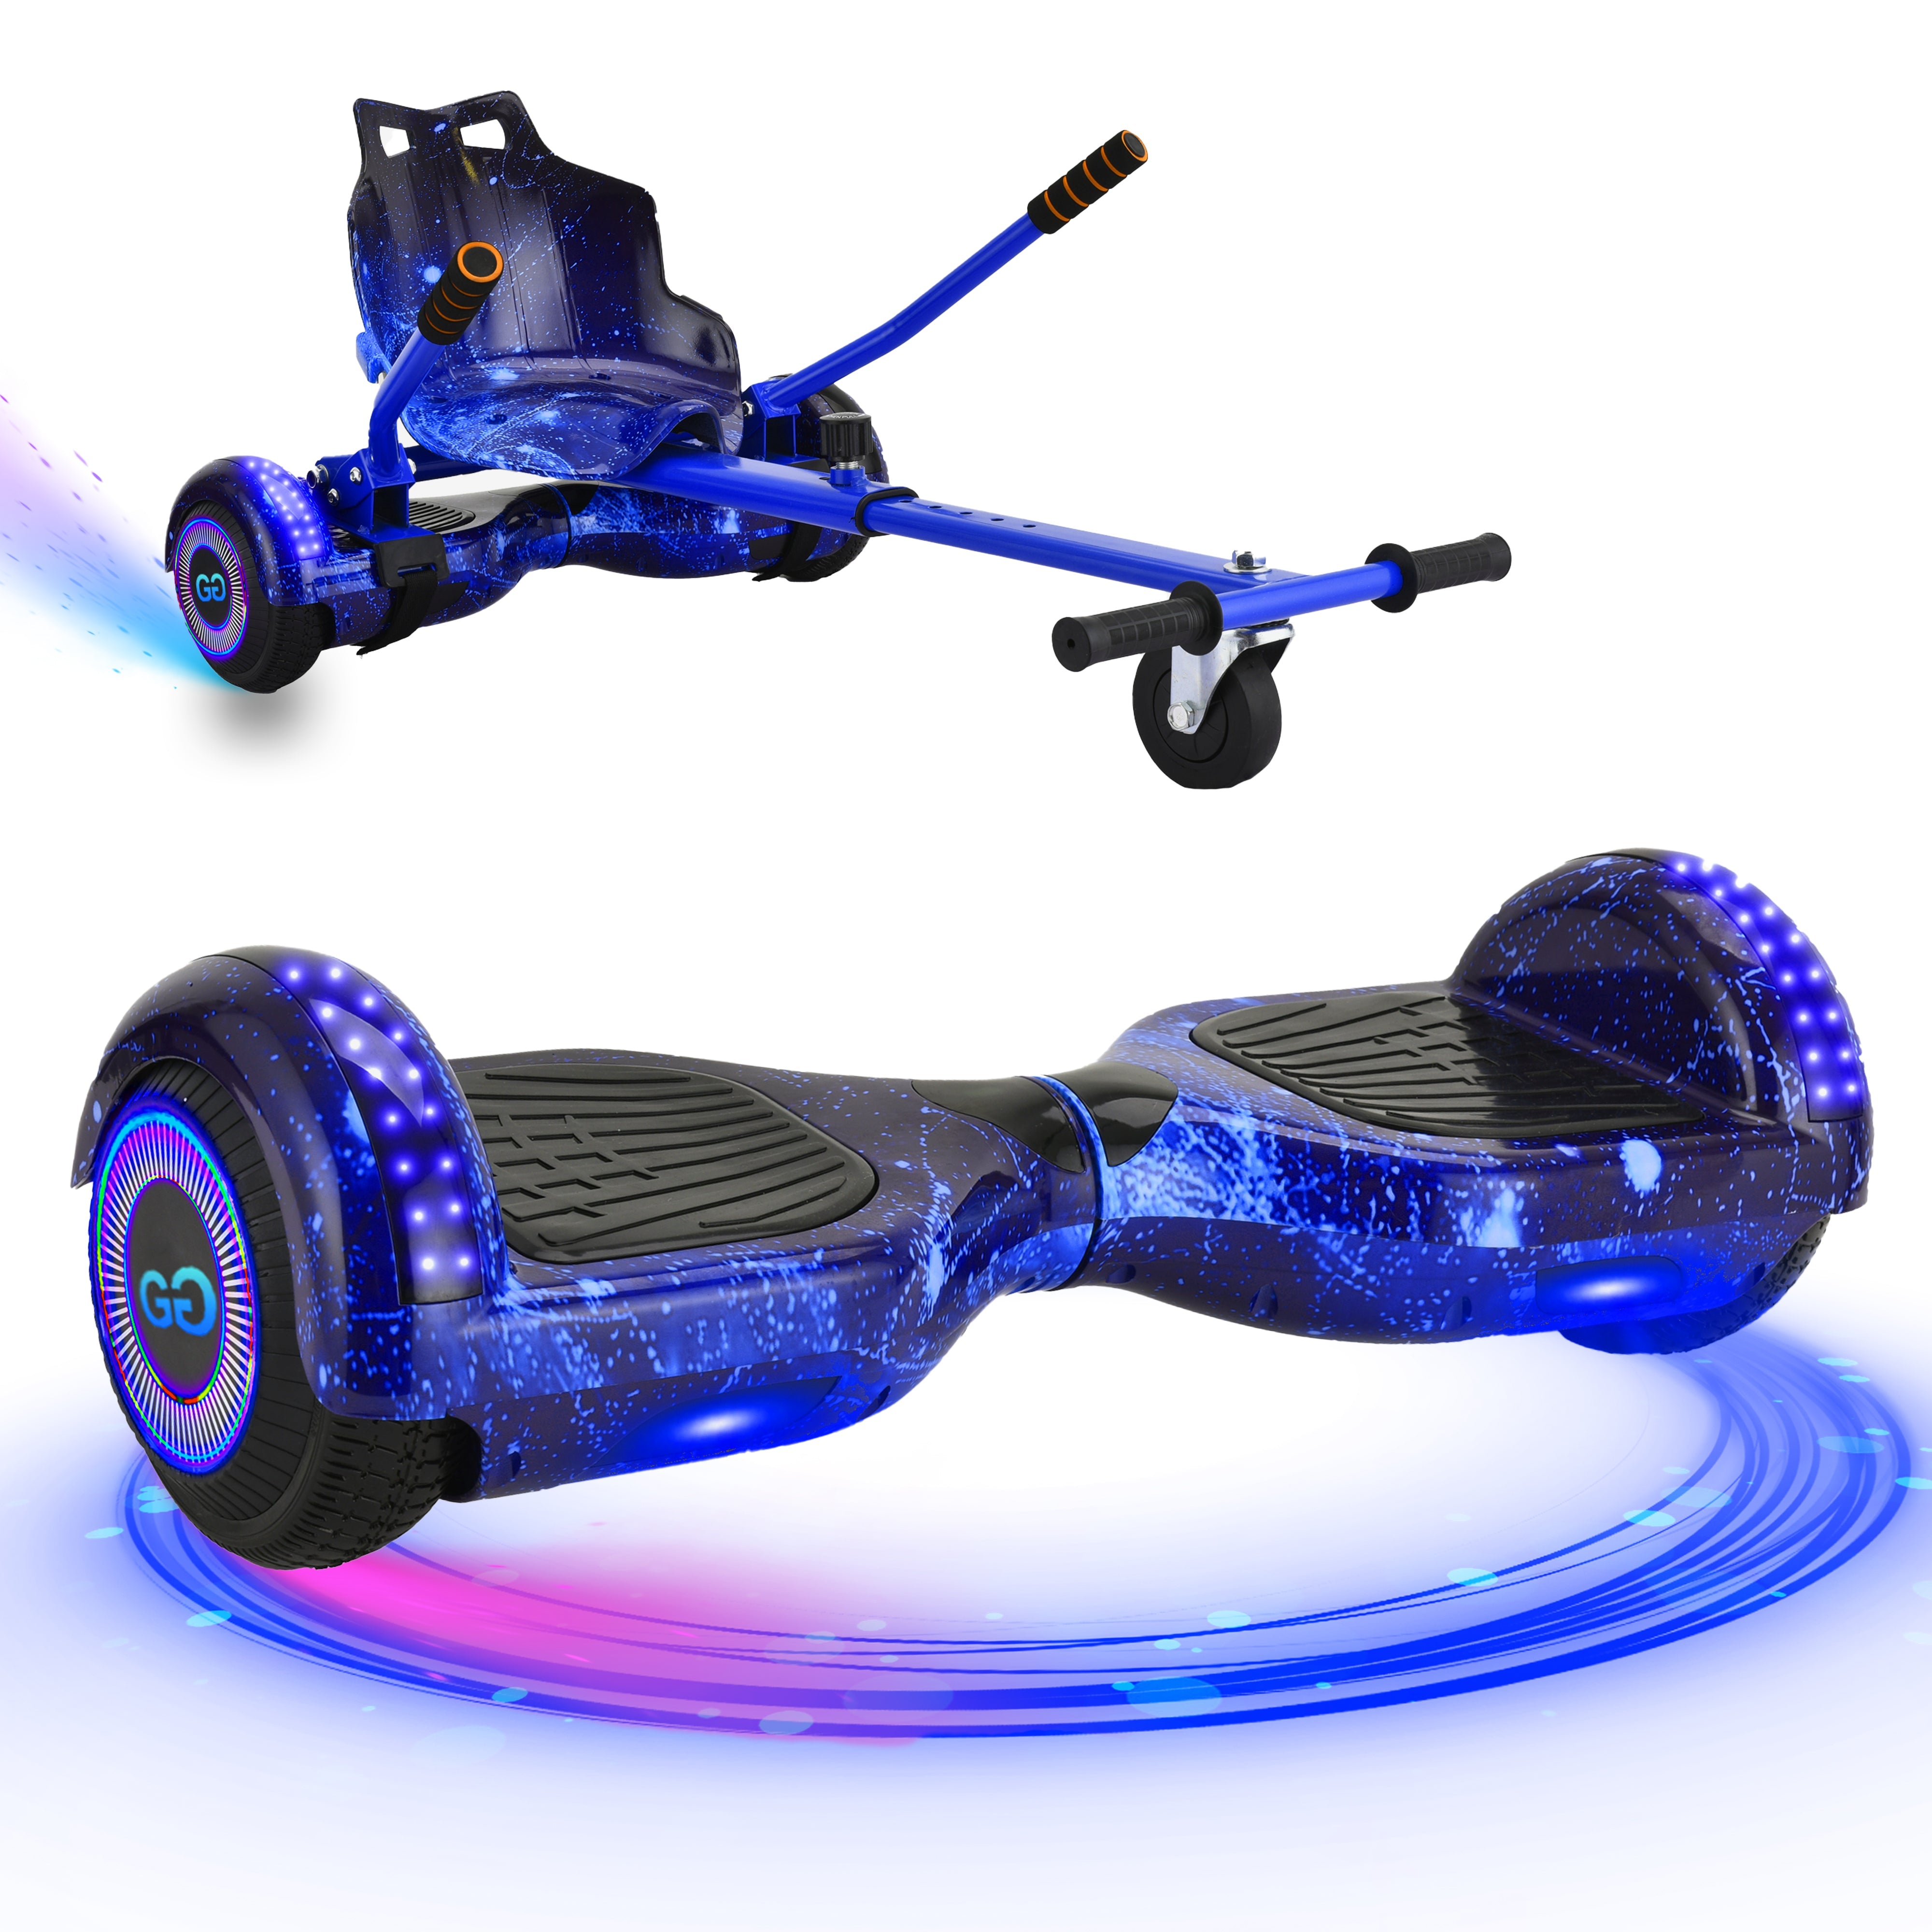 Blue hoverboard with Galaxy  Print and LED lights, featuring an attached go-kart conversion kit with rear handlebars and wheel.